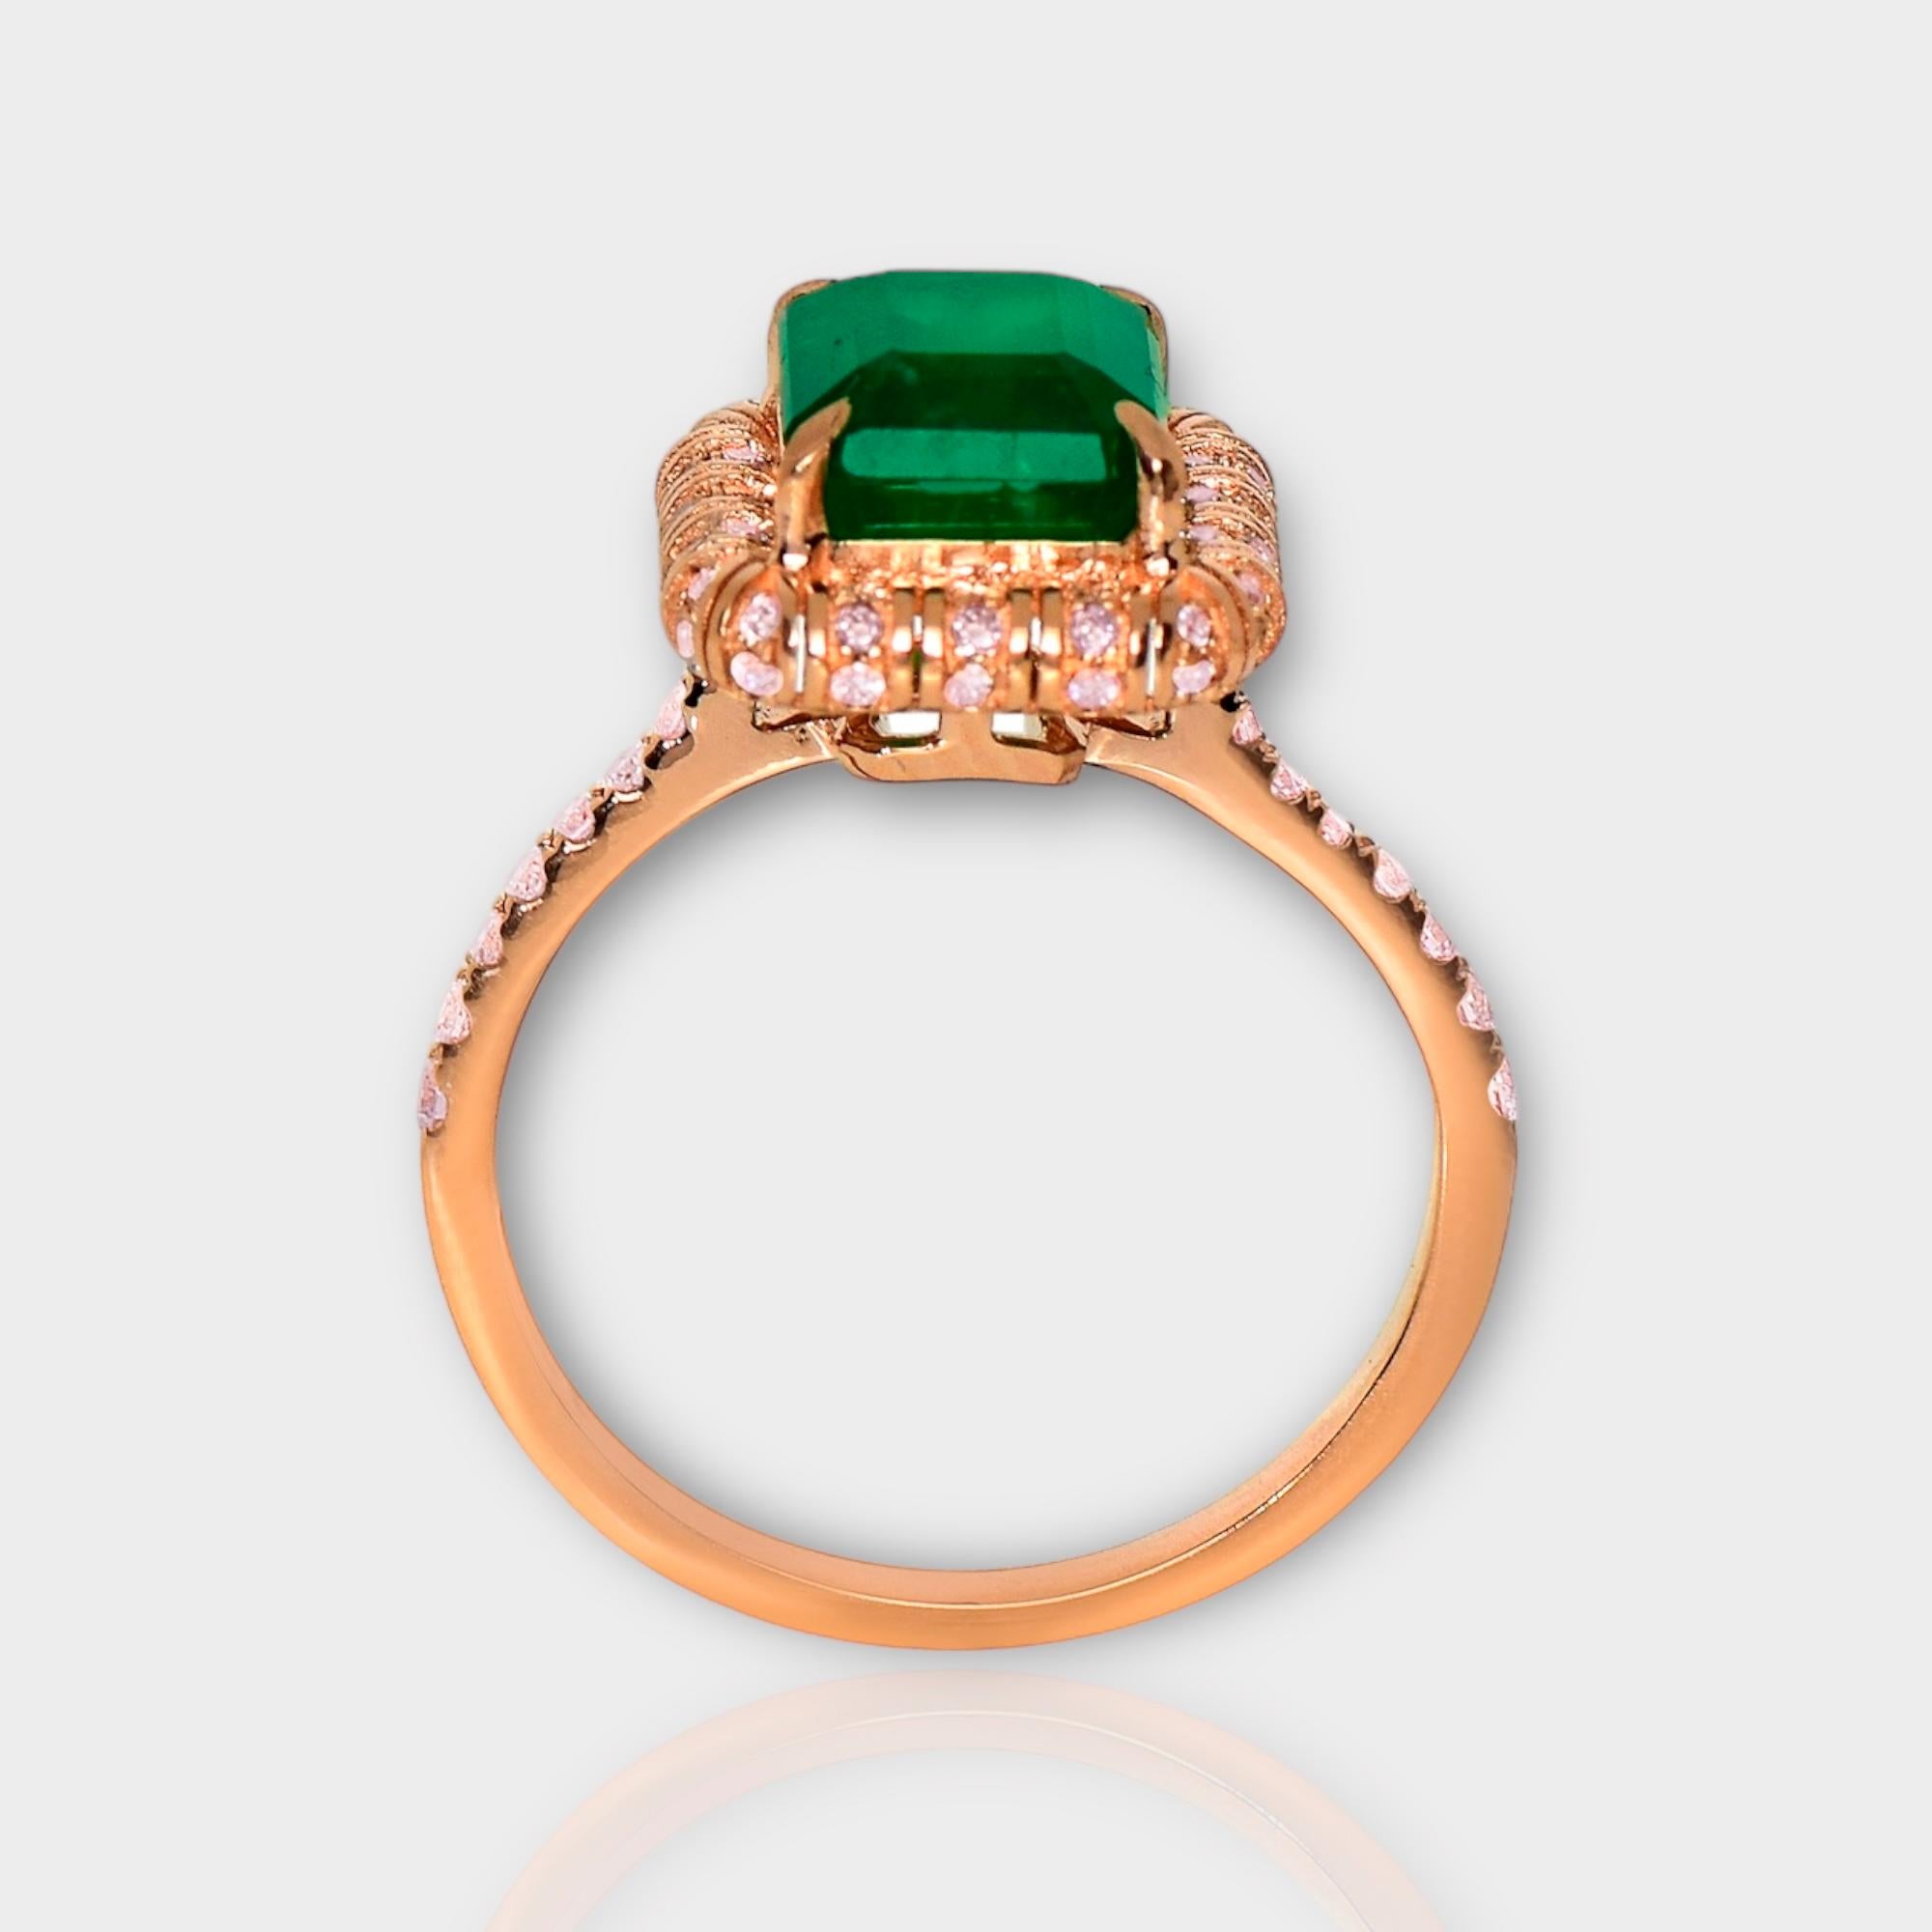 IGI 14K 2.53 ct Natural Green Emerald&Pink Diamond Art Deco Engagement Ring In New Condition For Sale In Kaohsiung City, TW